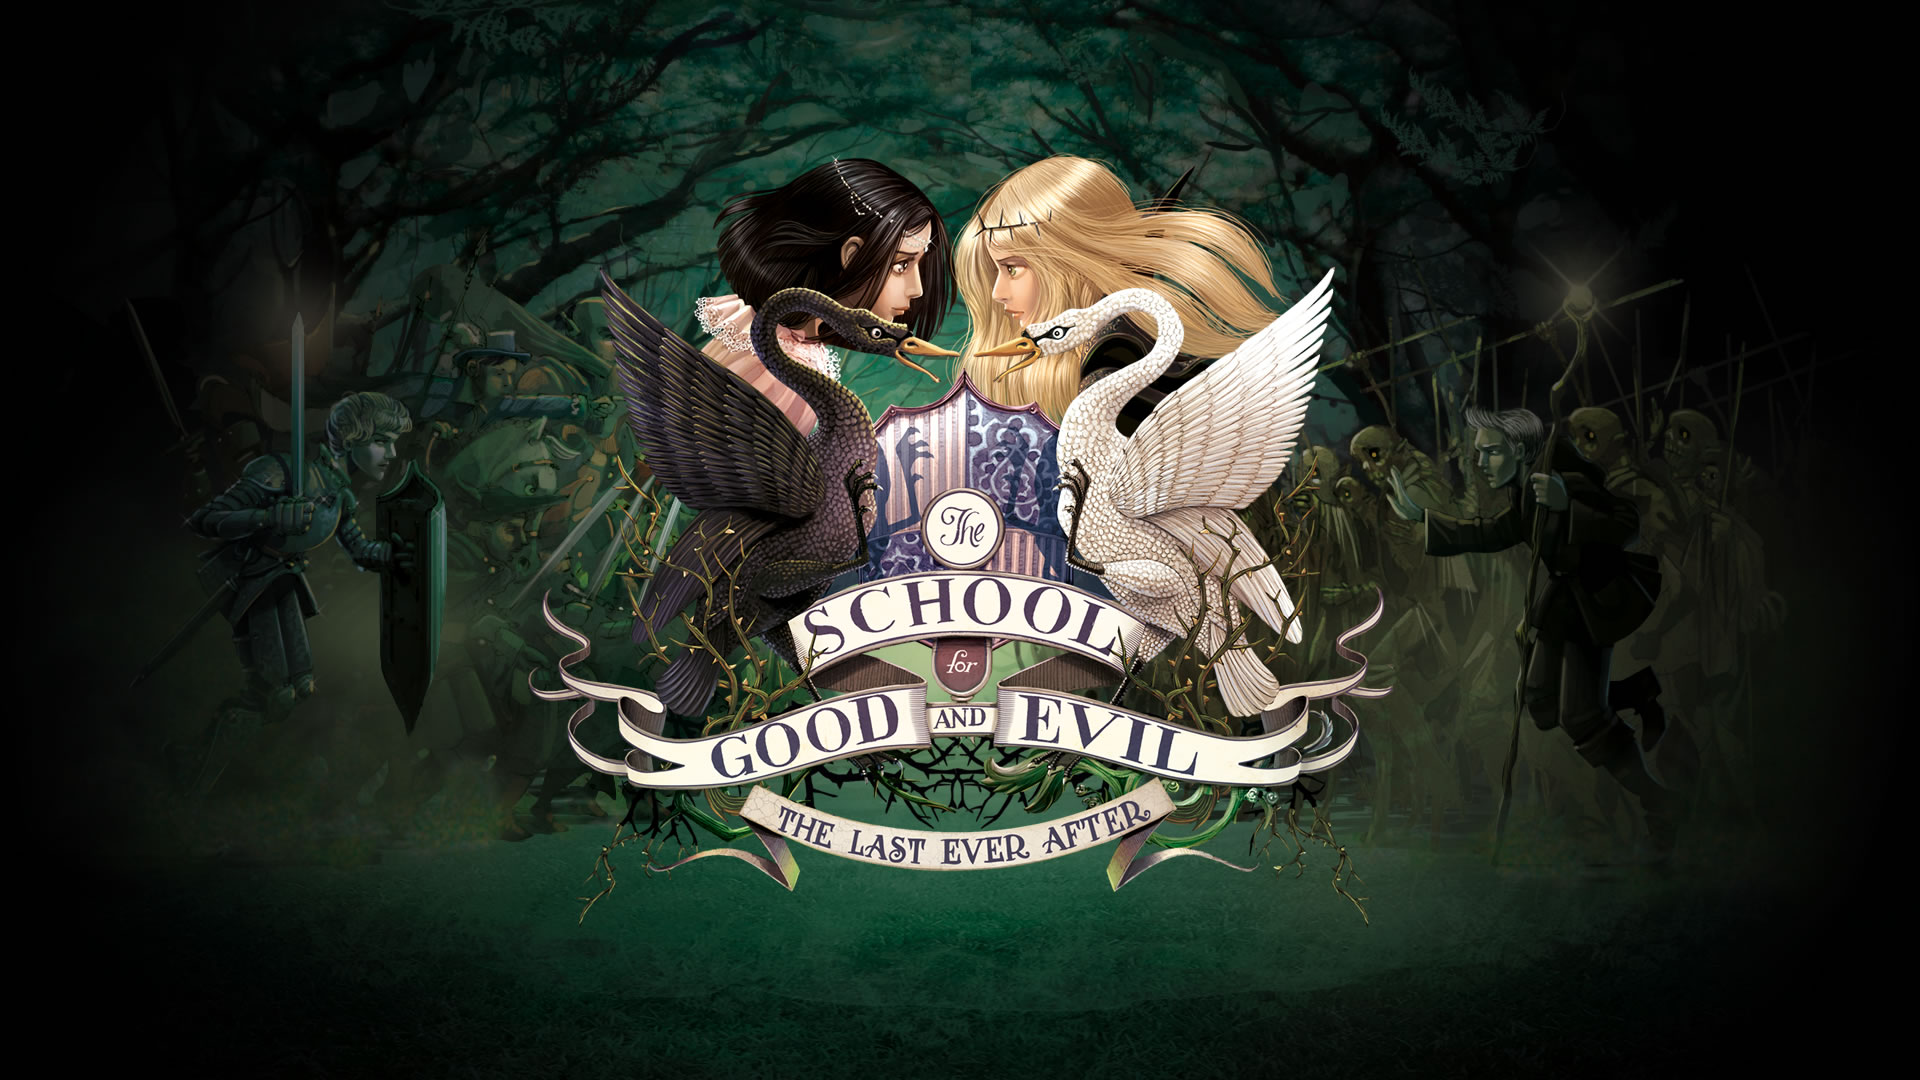 Novel The School For Good And Evil - HD Wallpaper 